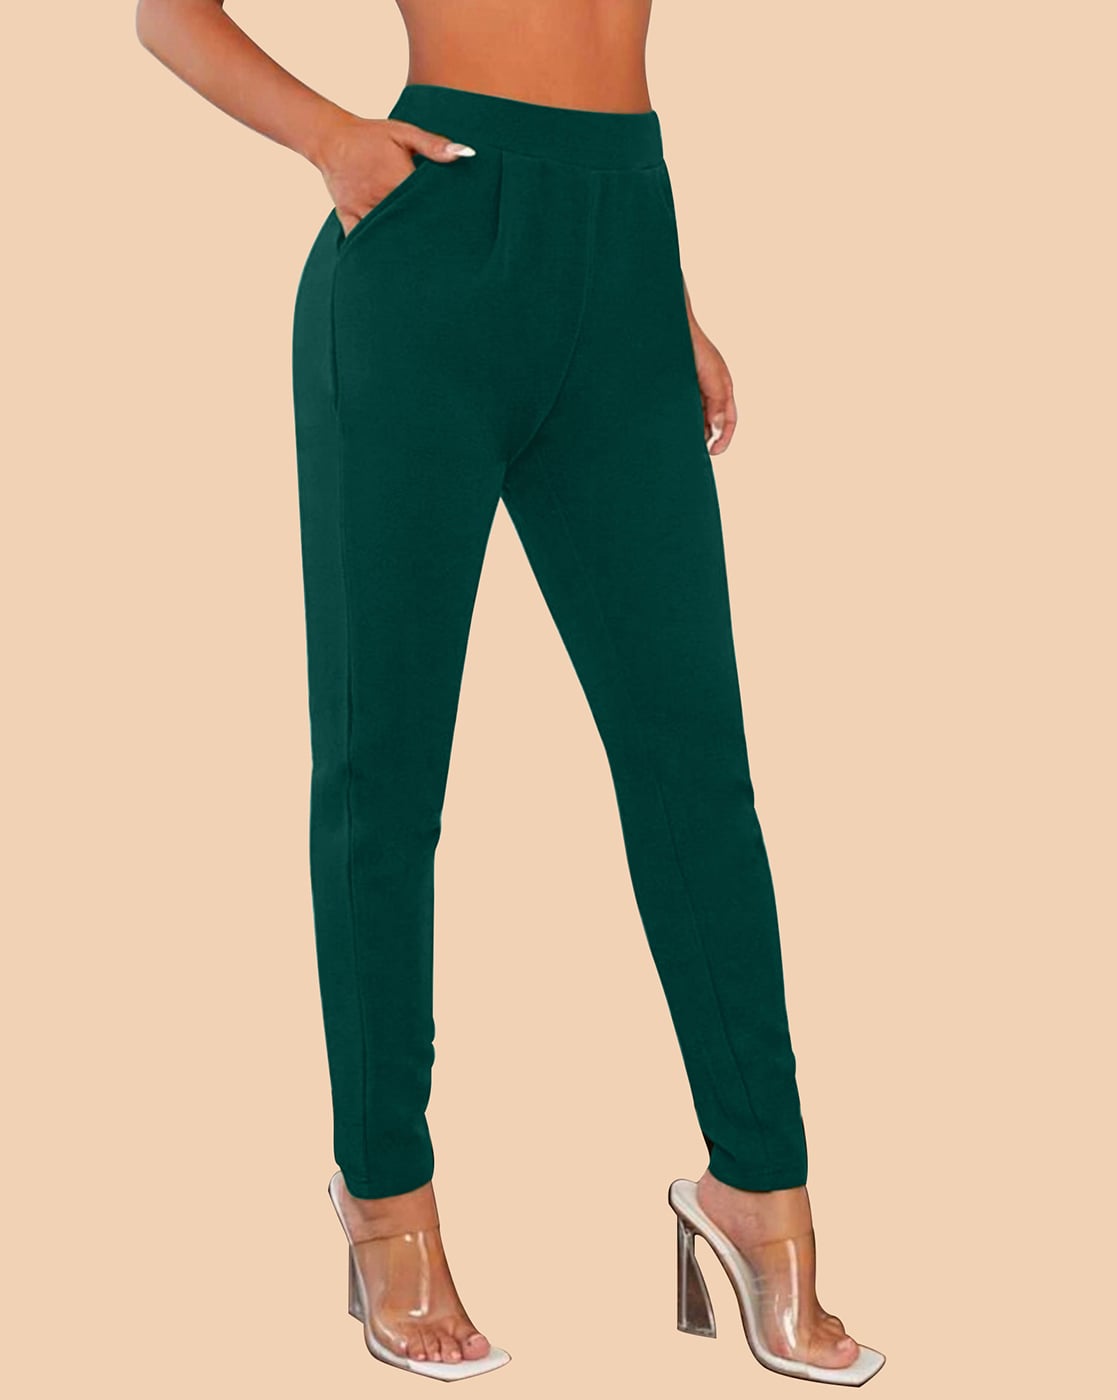 Army Green Cargo Pants With Pockets For Women Vintage Streetwear Straight High  Waist Denim Ladies Cargo Trousers Primark From Kua01, $26.78 | DHgate.Com